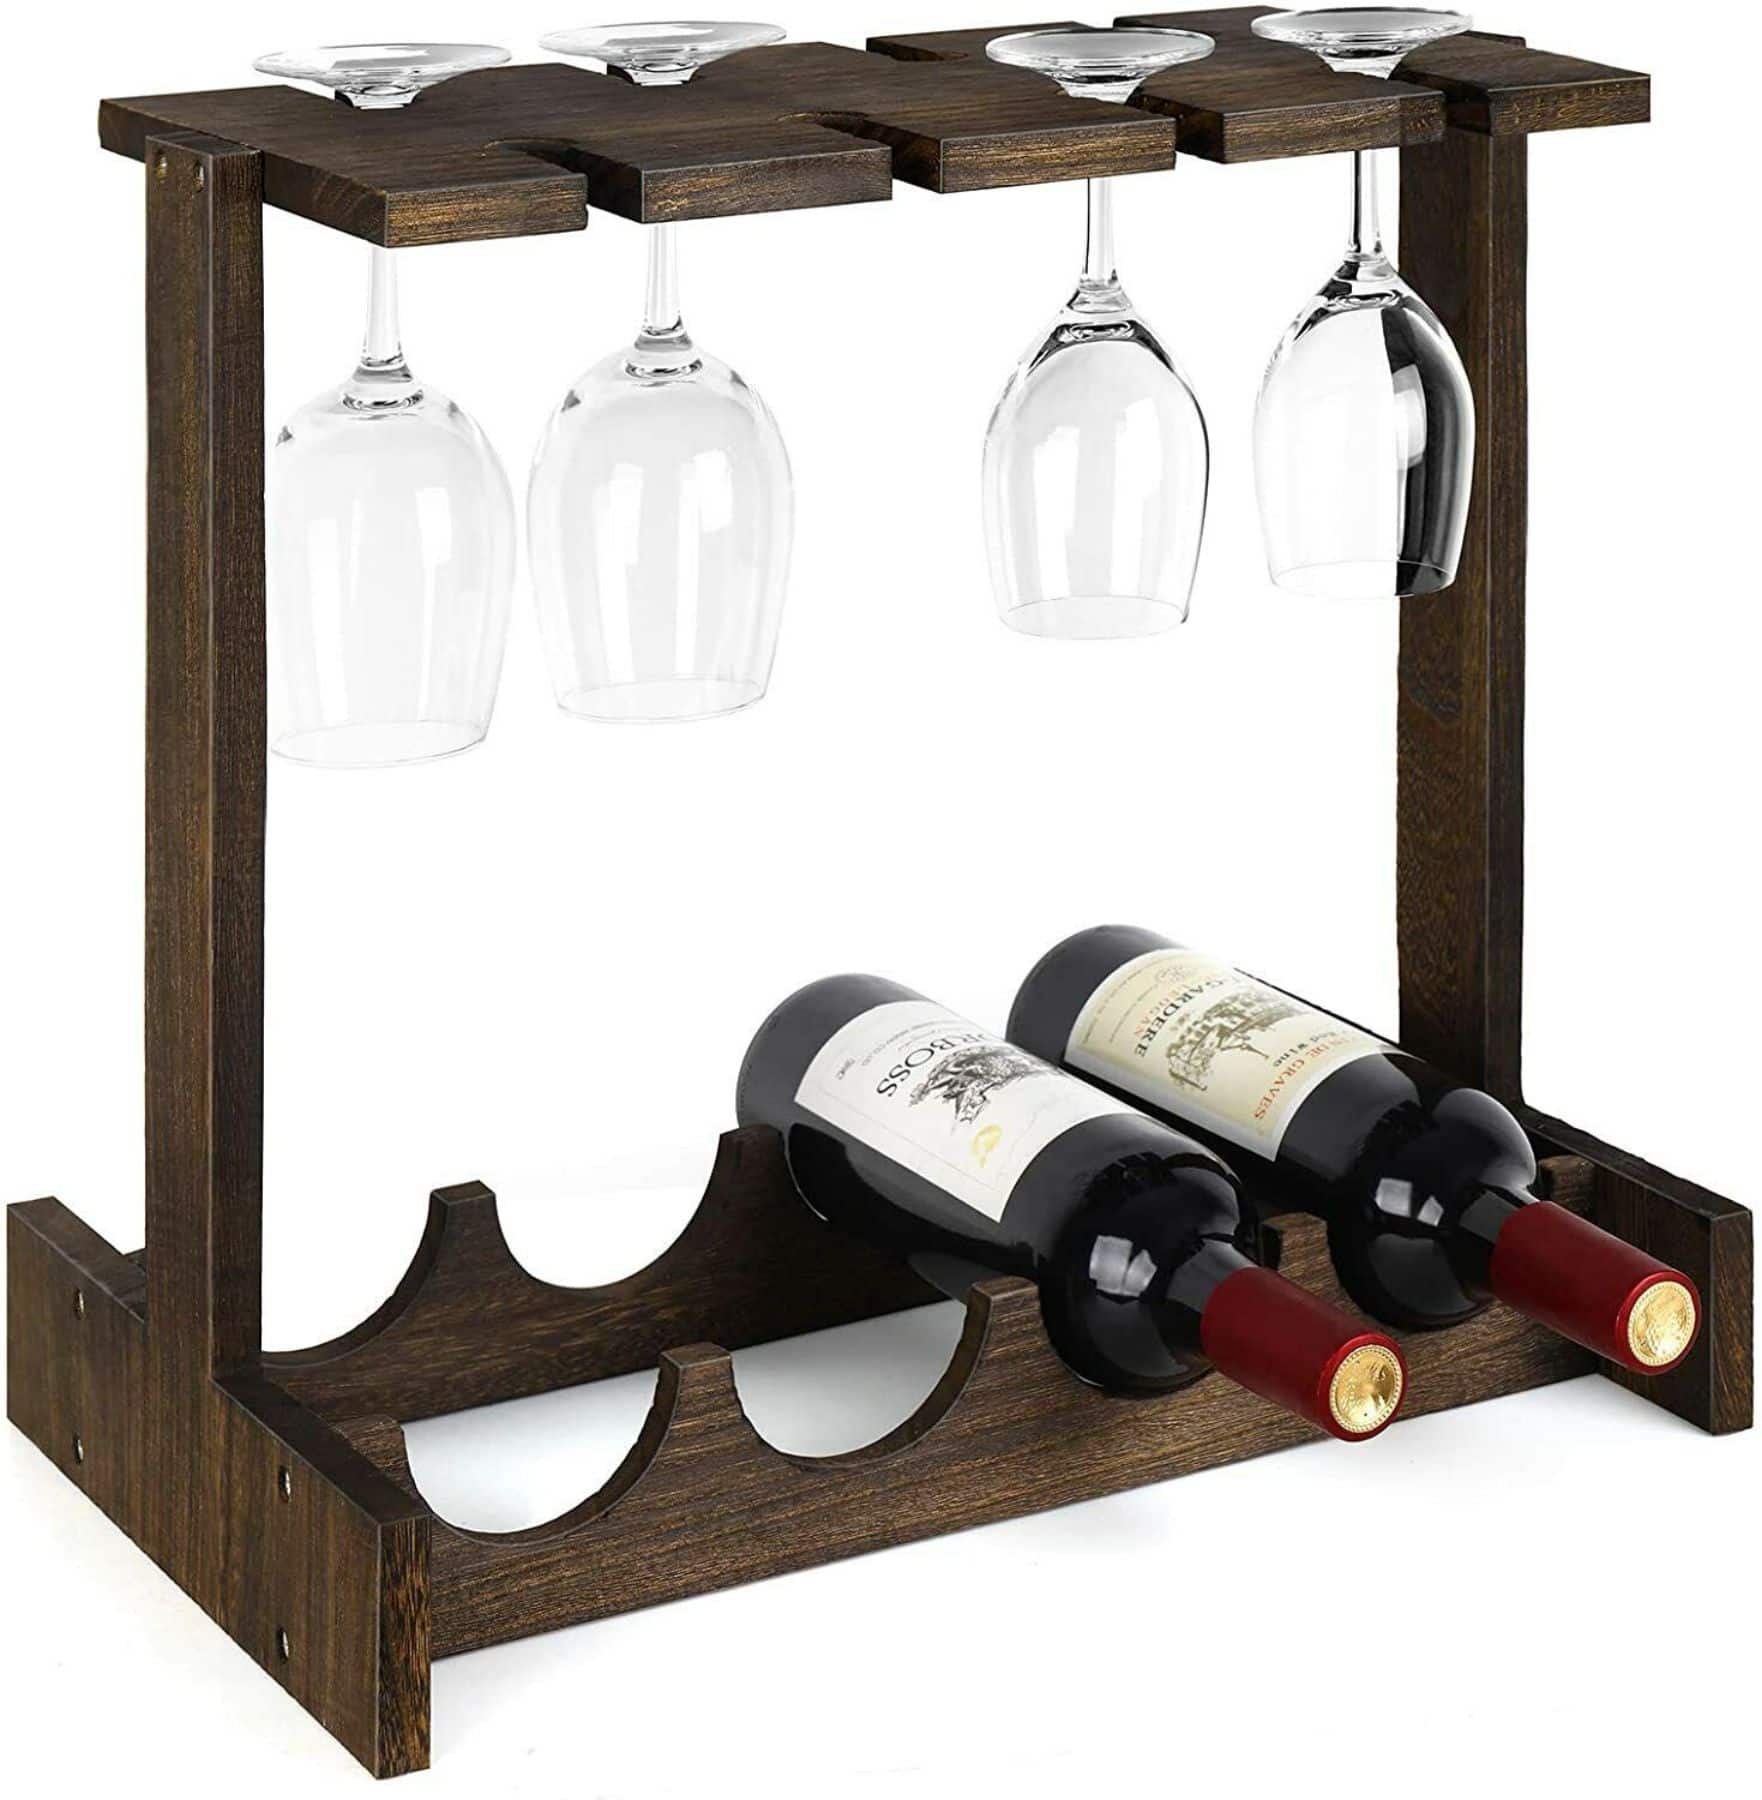 DIY Ribbon Holder from a Countertop Wine Rack